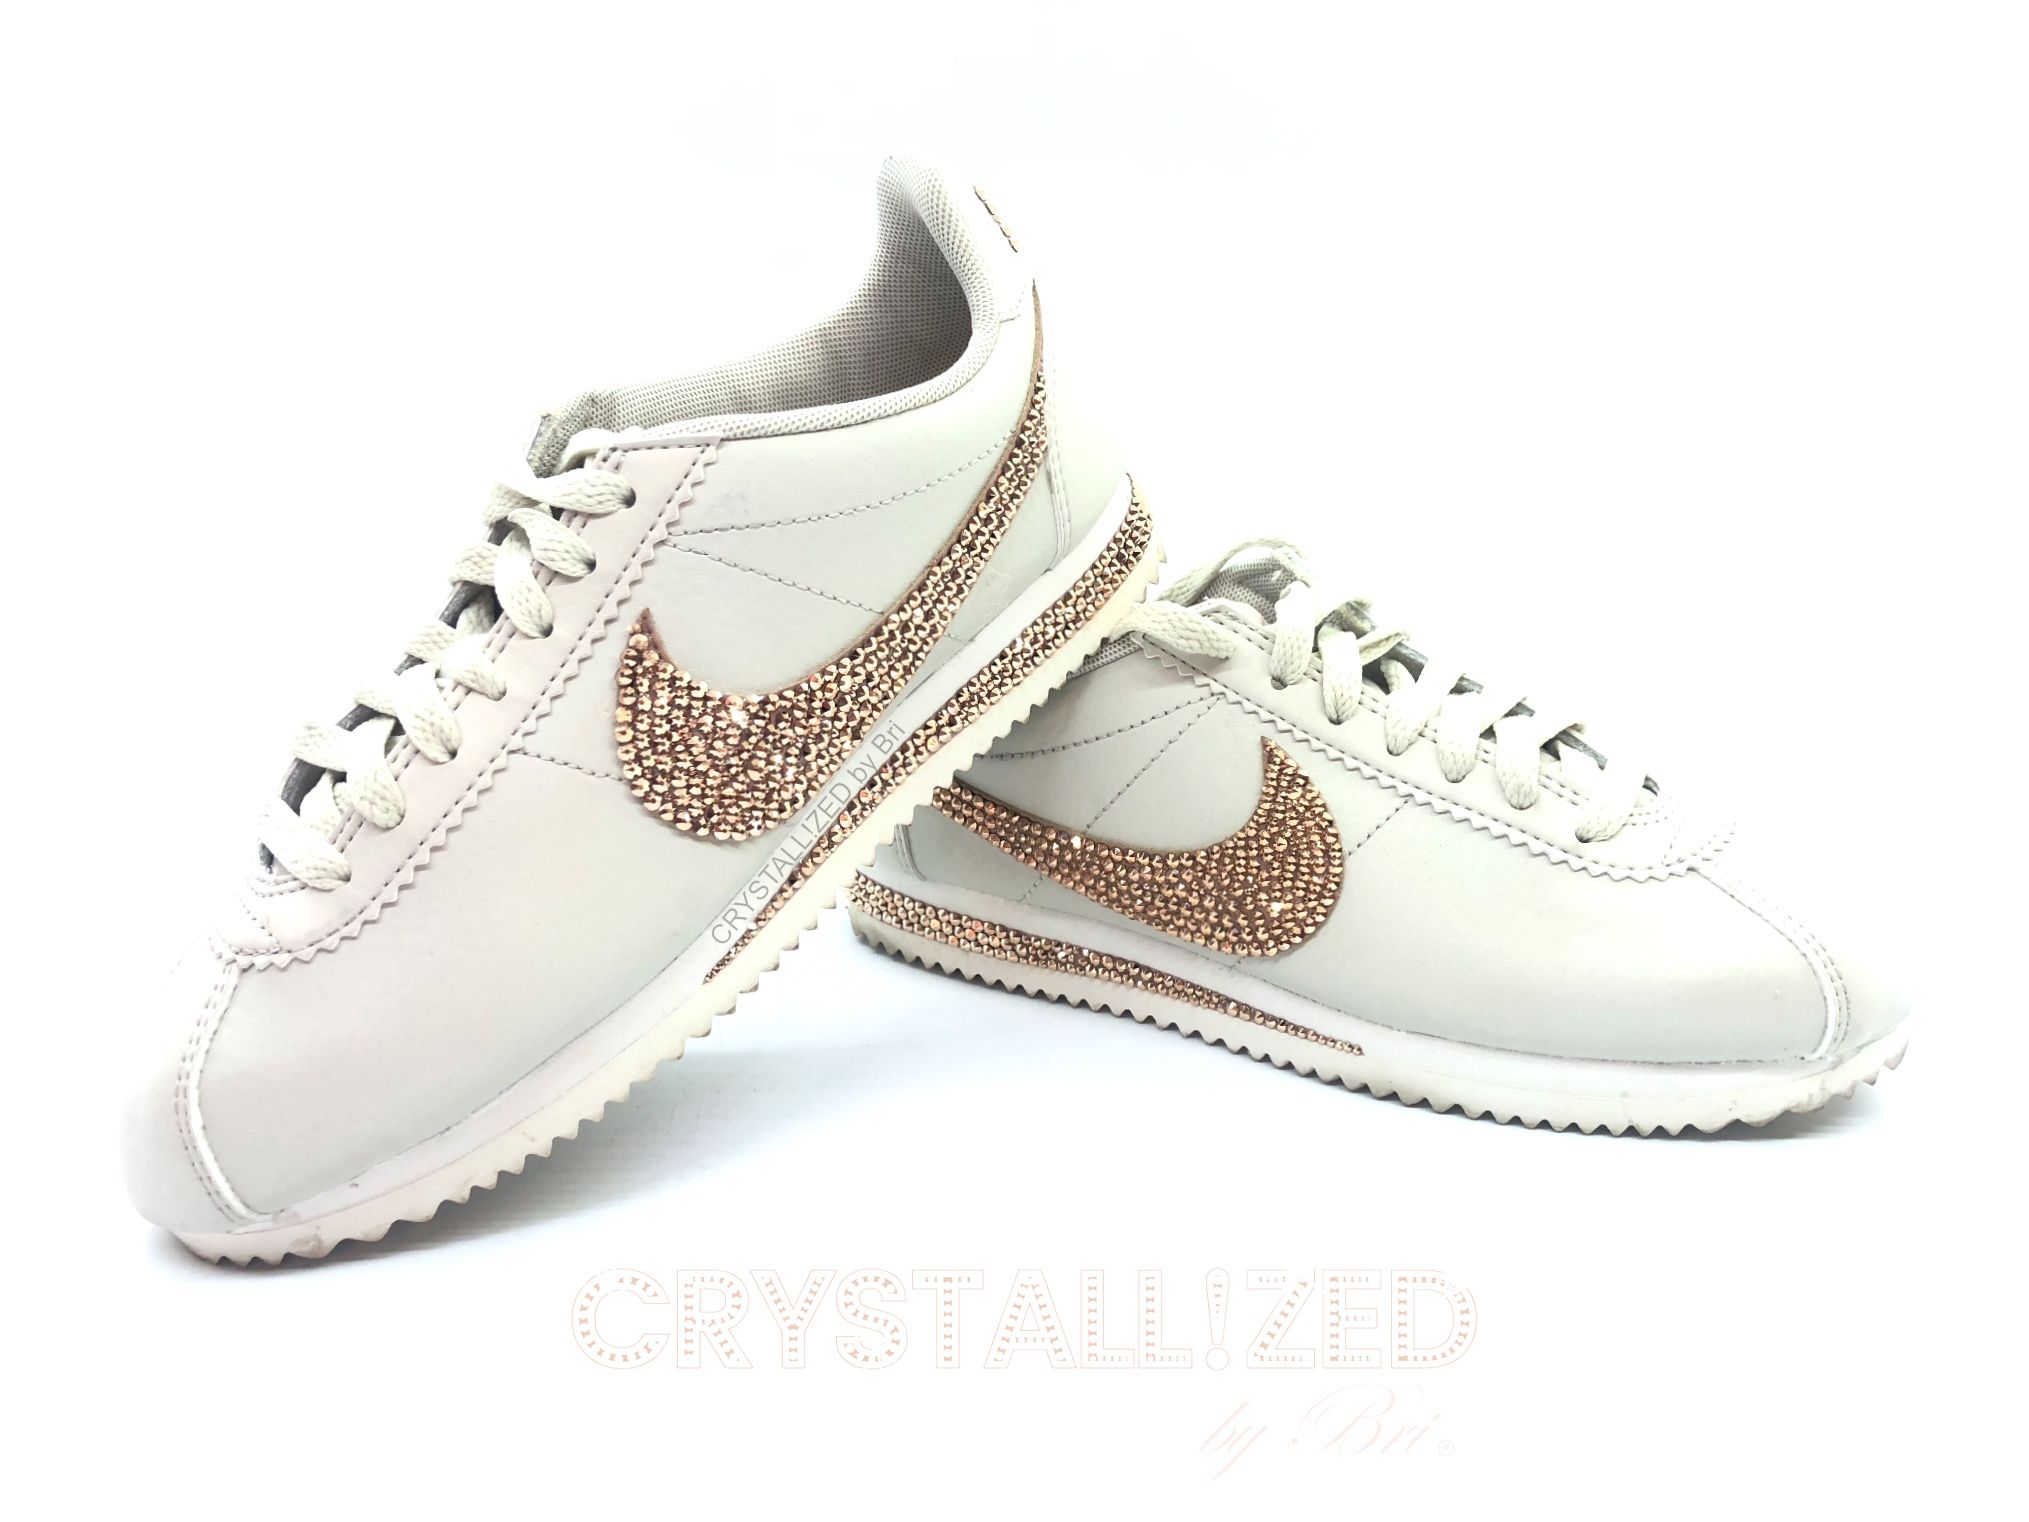 Buy Hand Made Nike Crystallized Classic Cortez Women's Sneakers Bling  European Crystals Bedazzled, made to order from CRYSTALL!ZED by Bri, LLC